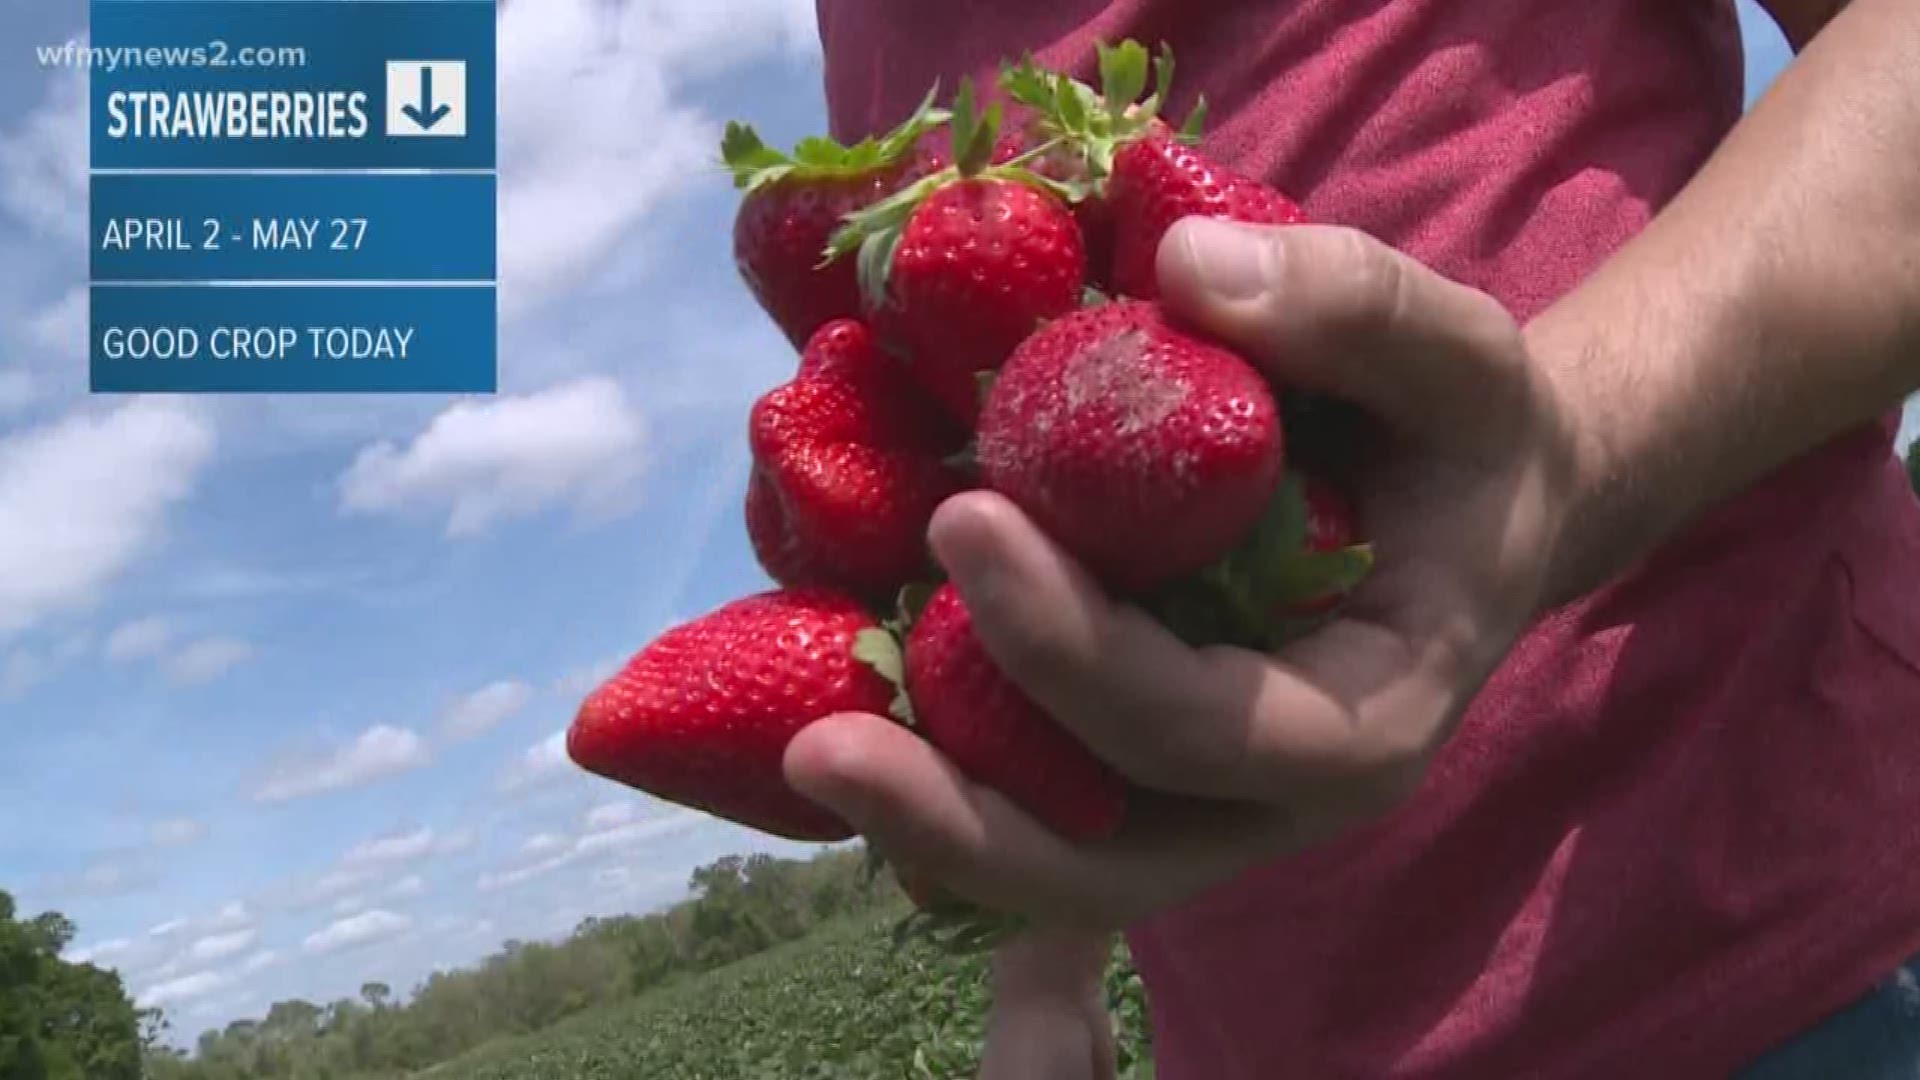 Wet and very warm temperatures are affecting this year’s strawberry crop, and it’s affecting the pick-your-own opportunities for families.